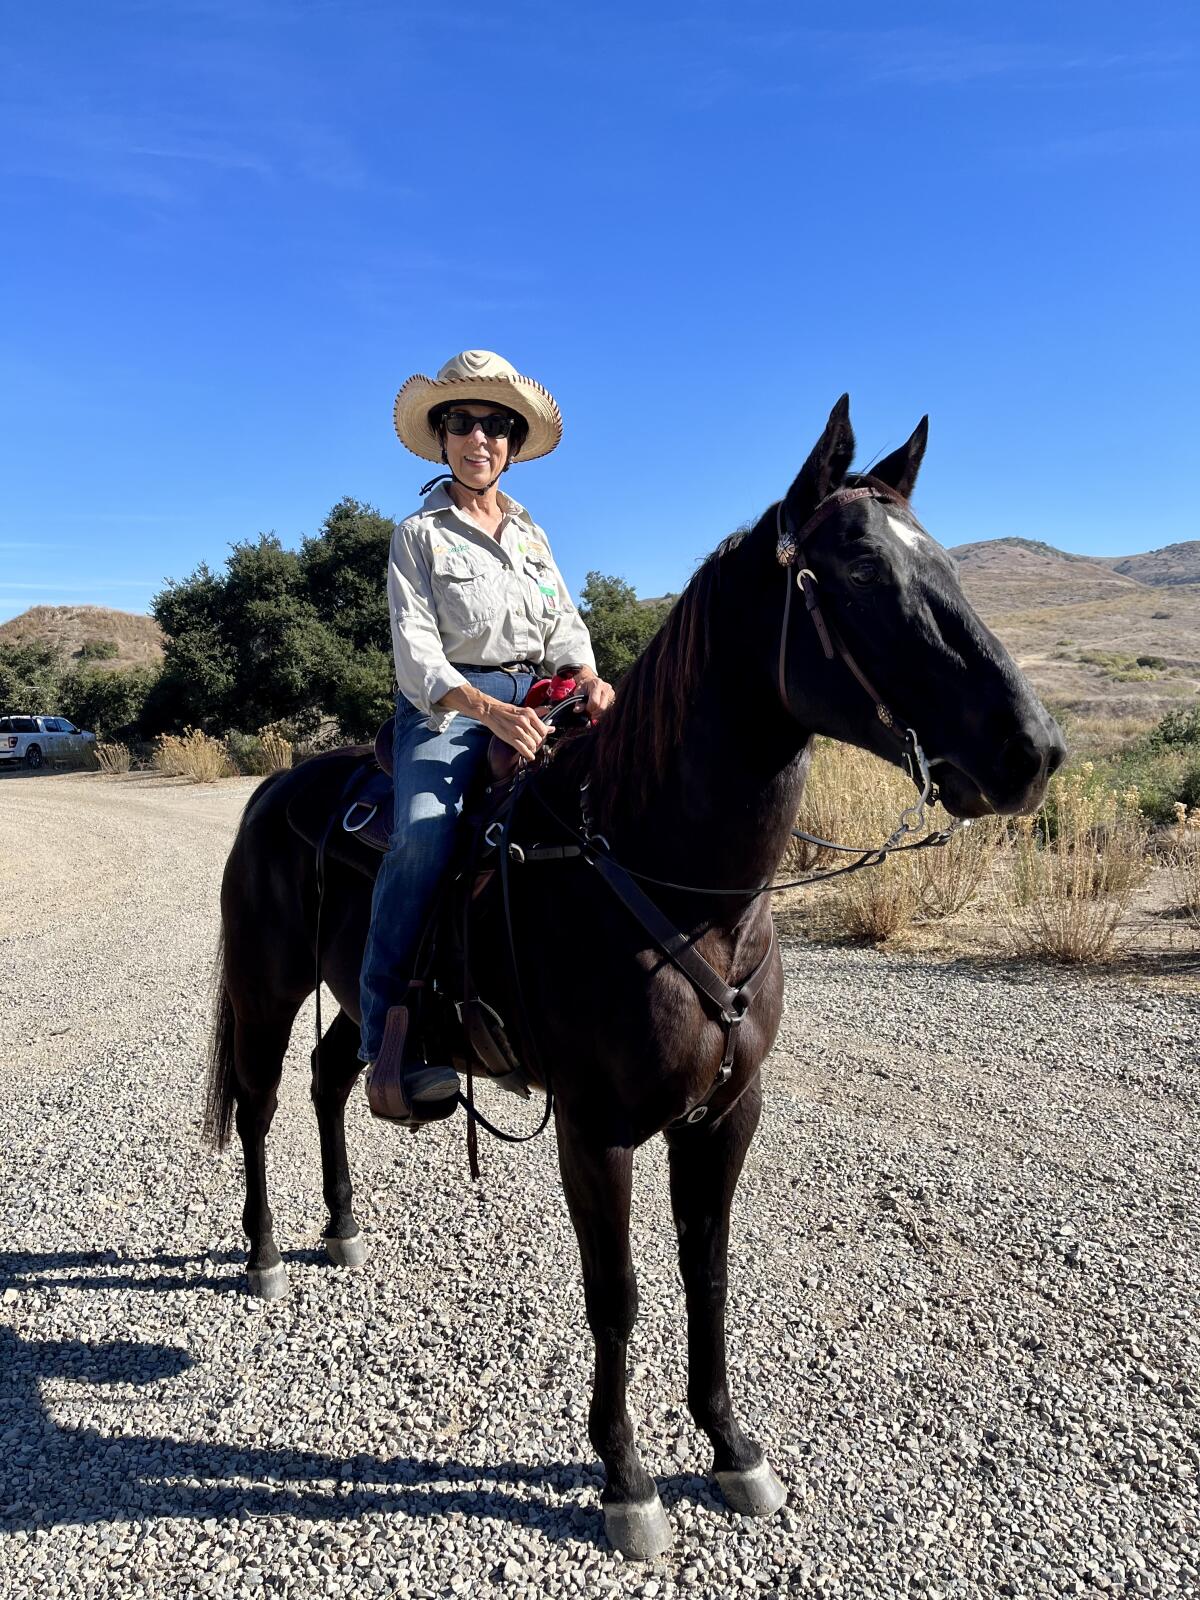 An OC Parks docent and her horse, Jessie, at Gypsum Canyon Wilderness.